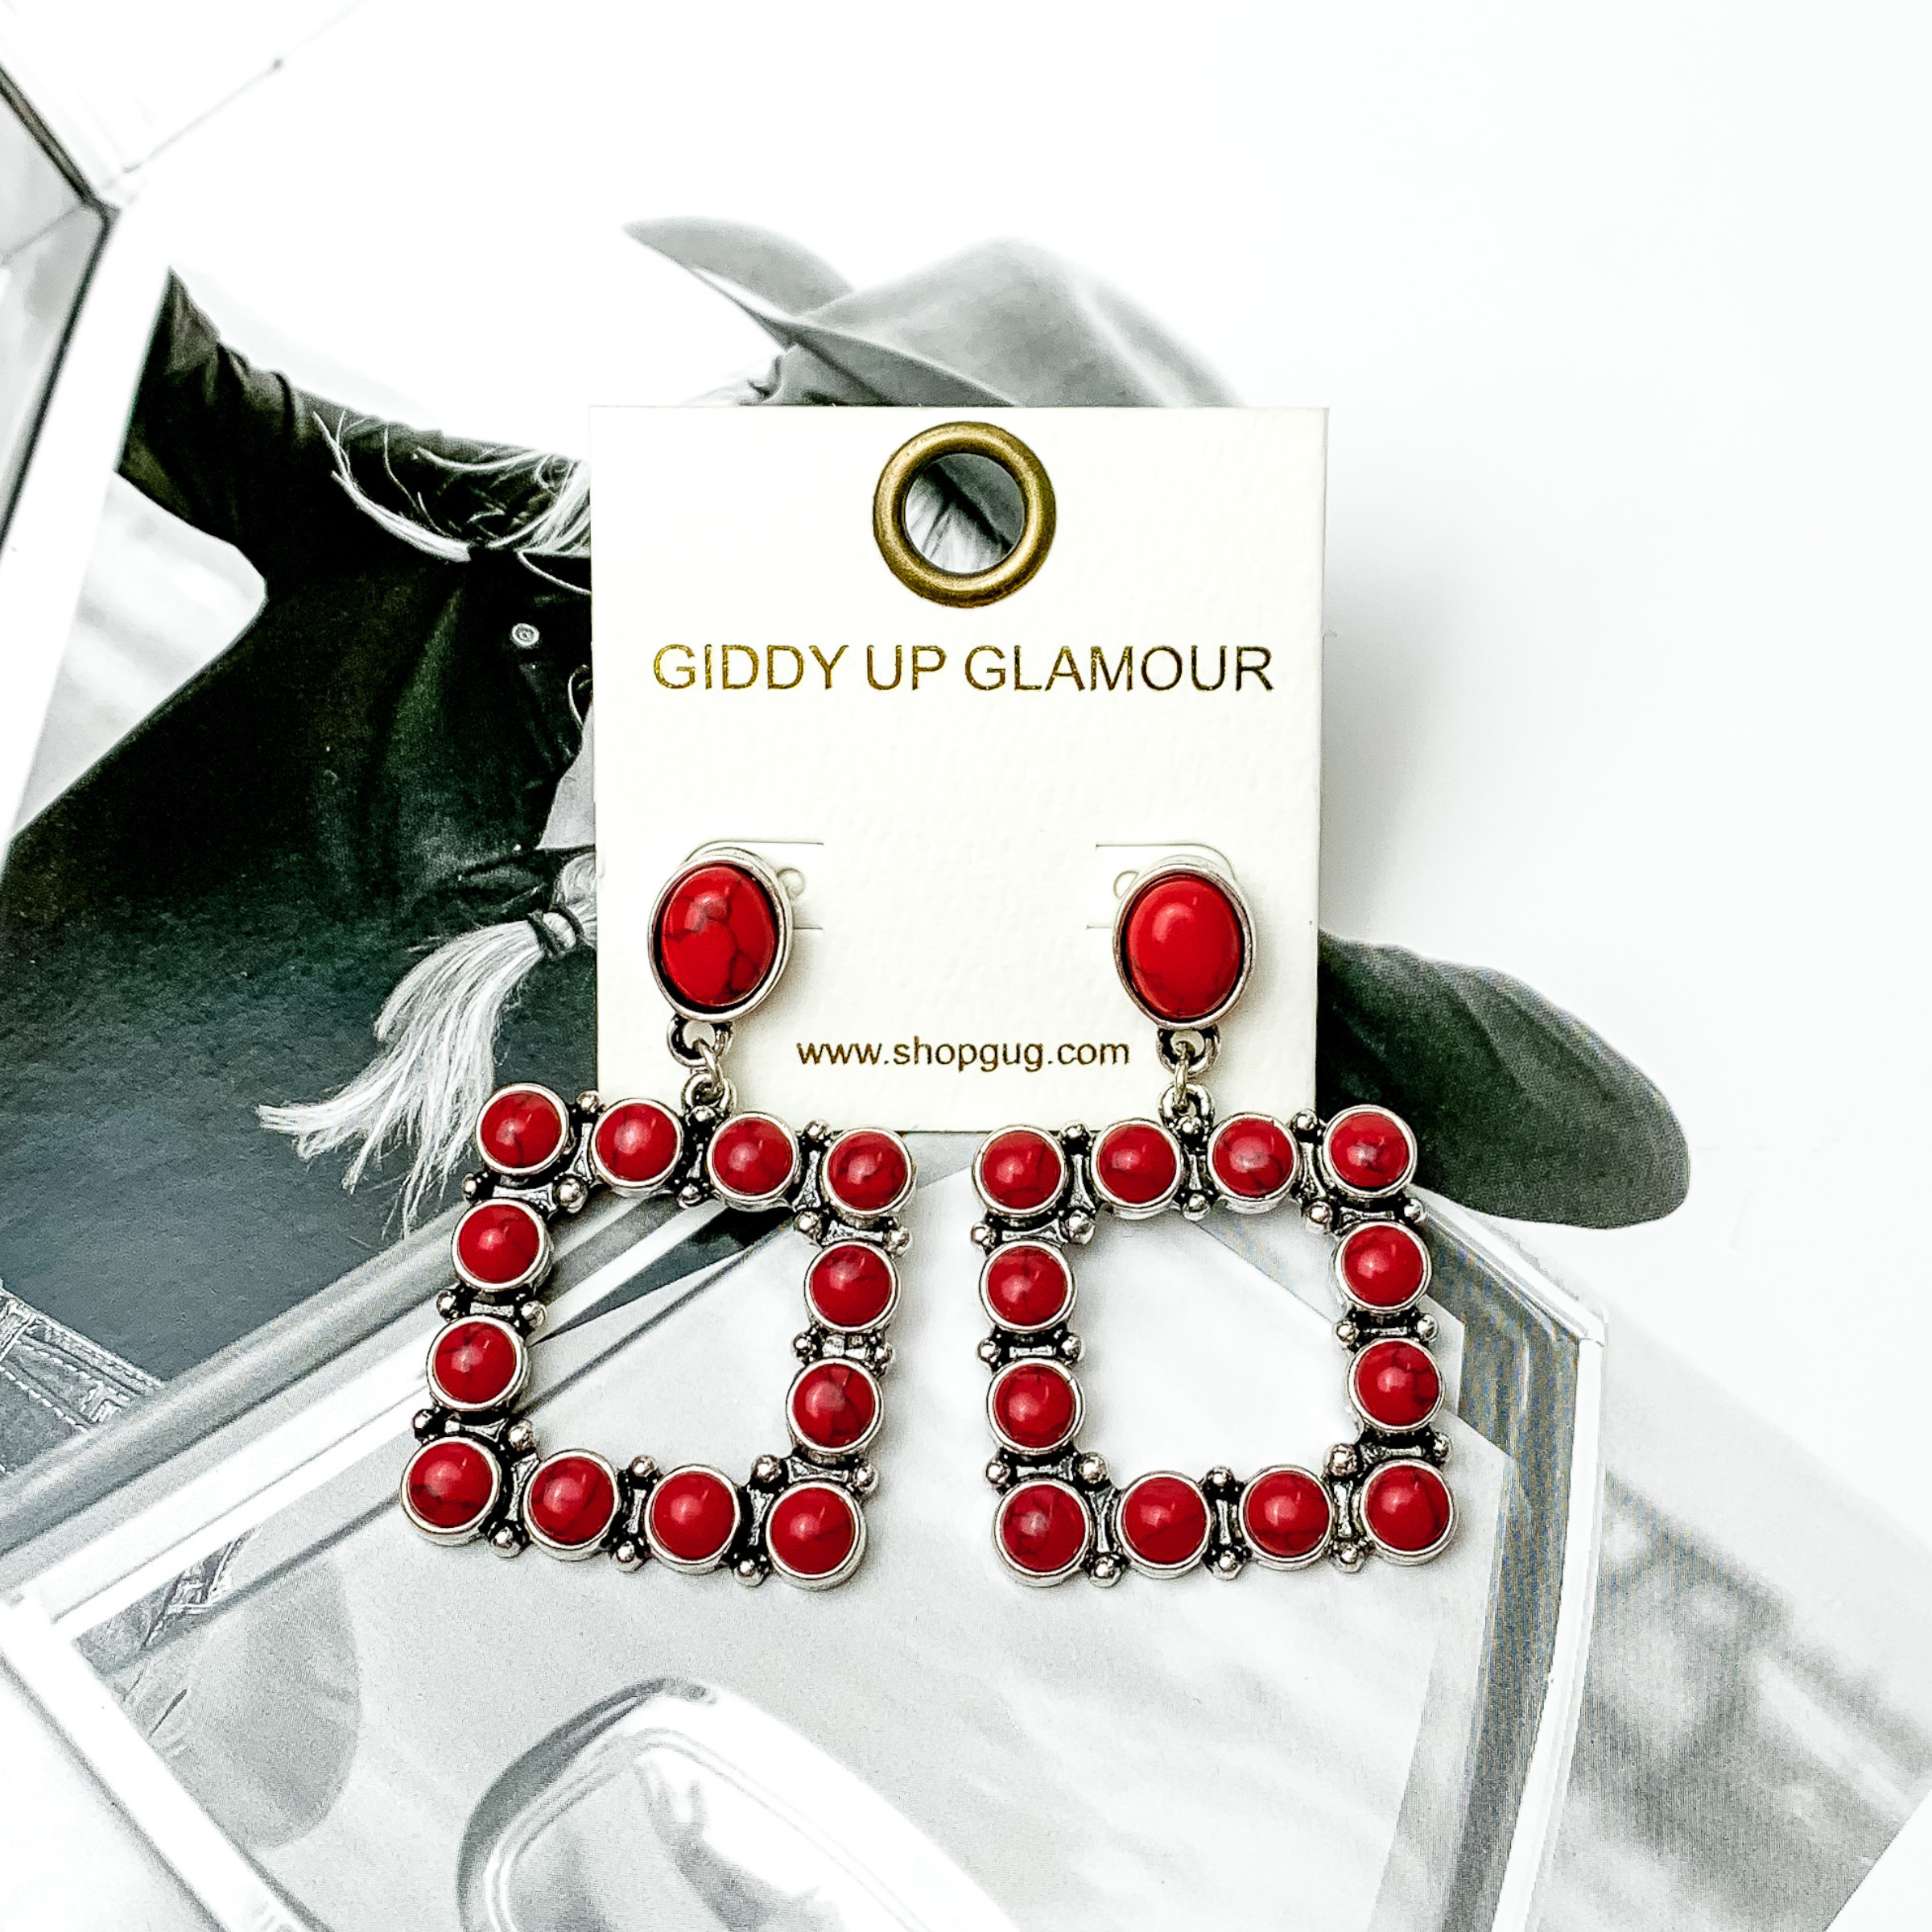 Open square drop earrings with red stones. These earrings are pictured on a black and white picture. 